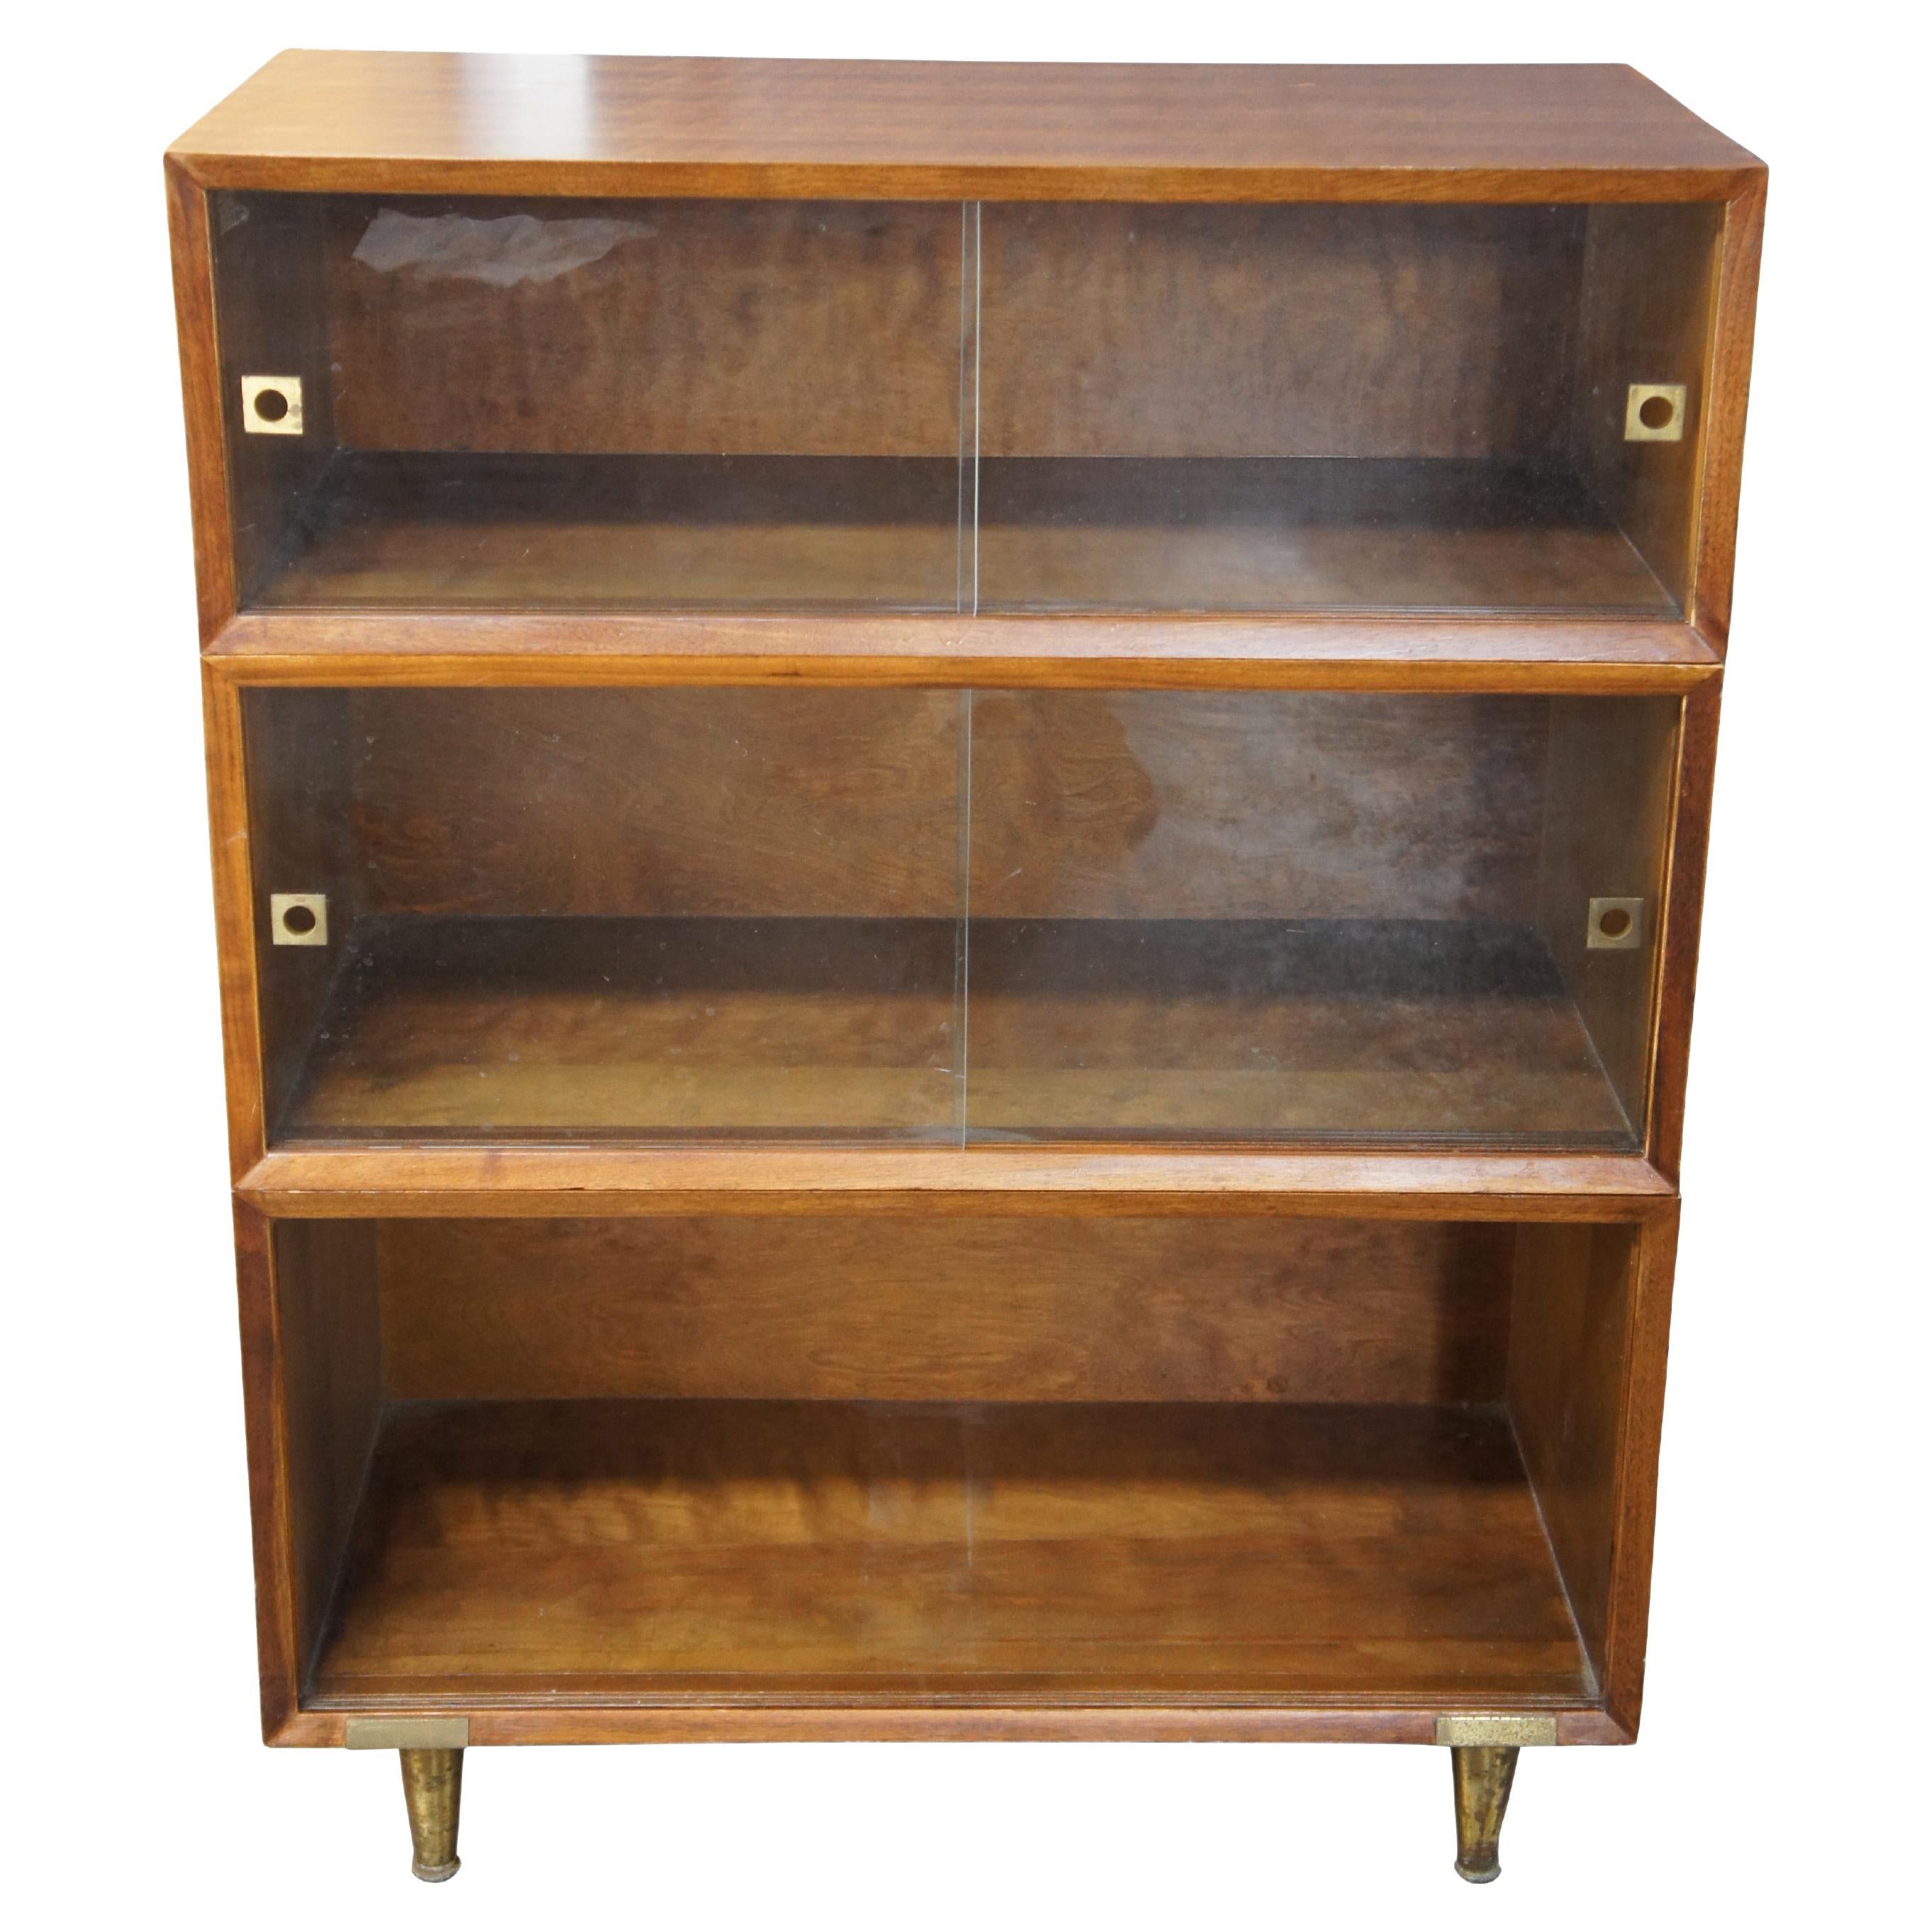 Hale Walnut Barrister Style Stacked Bookcase Display Cabinet Mid Century Modern For Sale